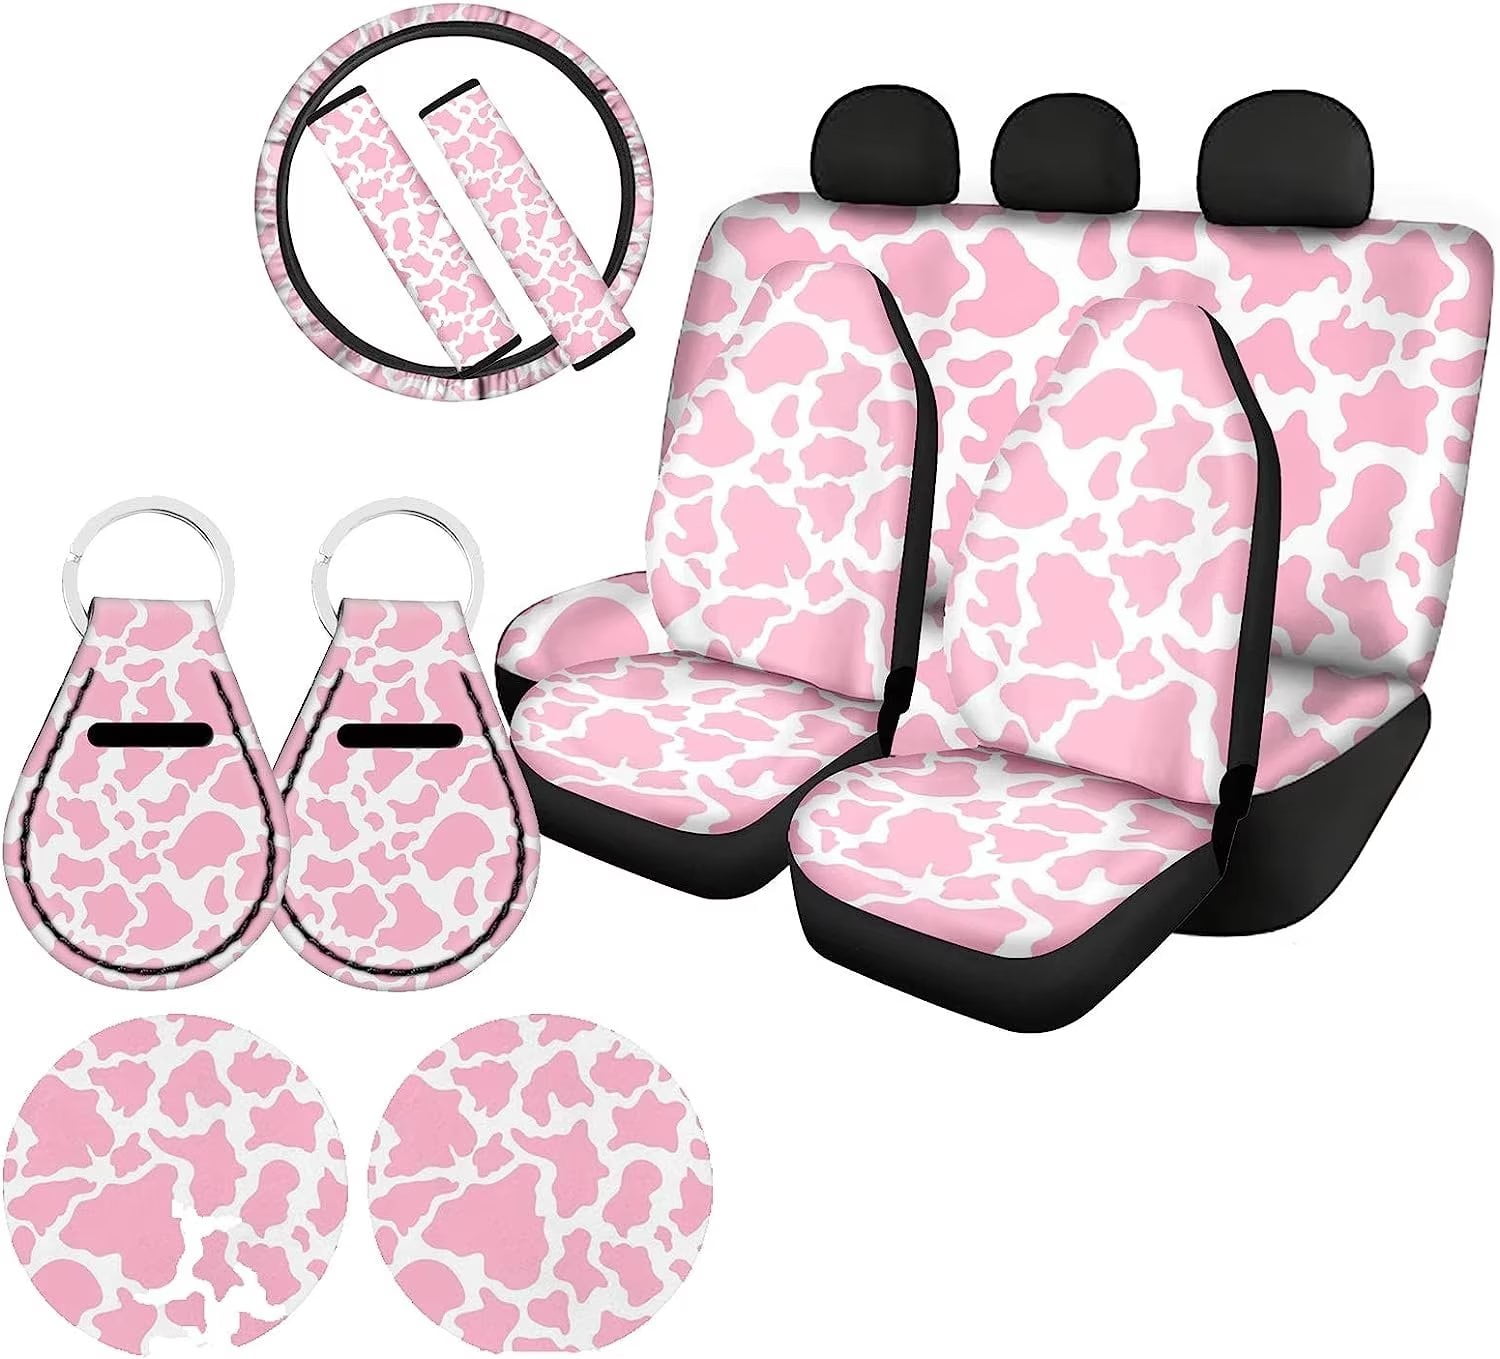 Pzuqiu Cow Print Accessories for Car Seat Covers Full Set 11 Pcs Pink  Steering Wheel Cover Vehicle Cup Coasters Holder Keychain for Women  Automotive Bucket Seat Protector 